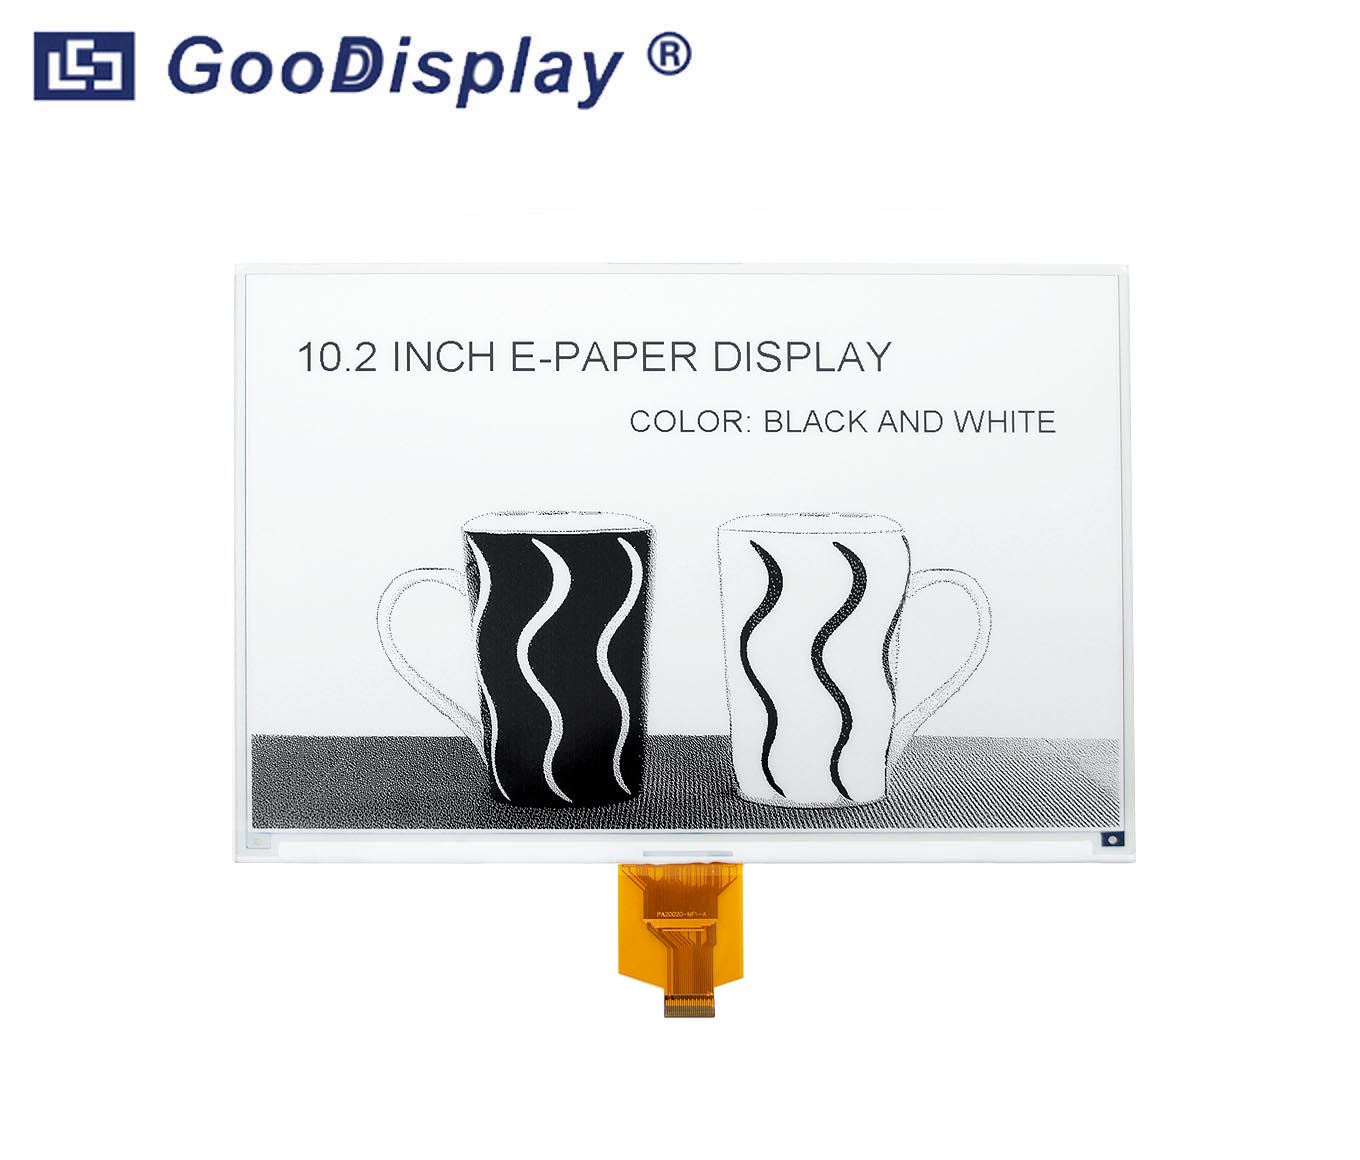 10.2inch large e-paper 960x640 resolution SPI display, GDEQ102T90